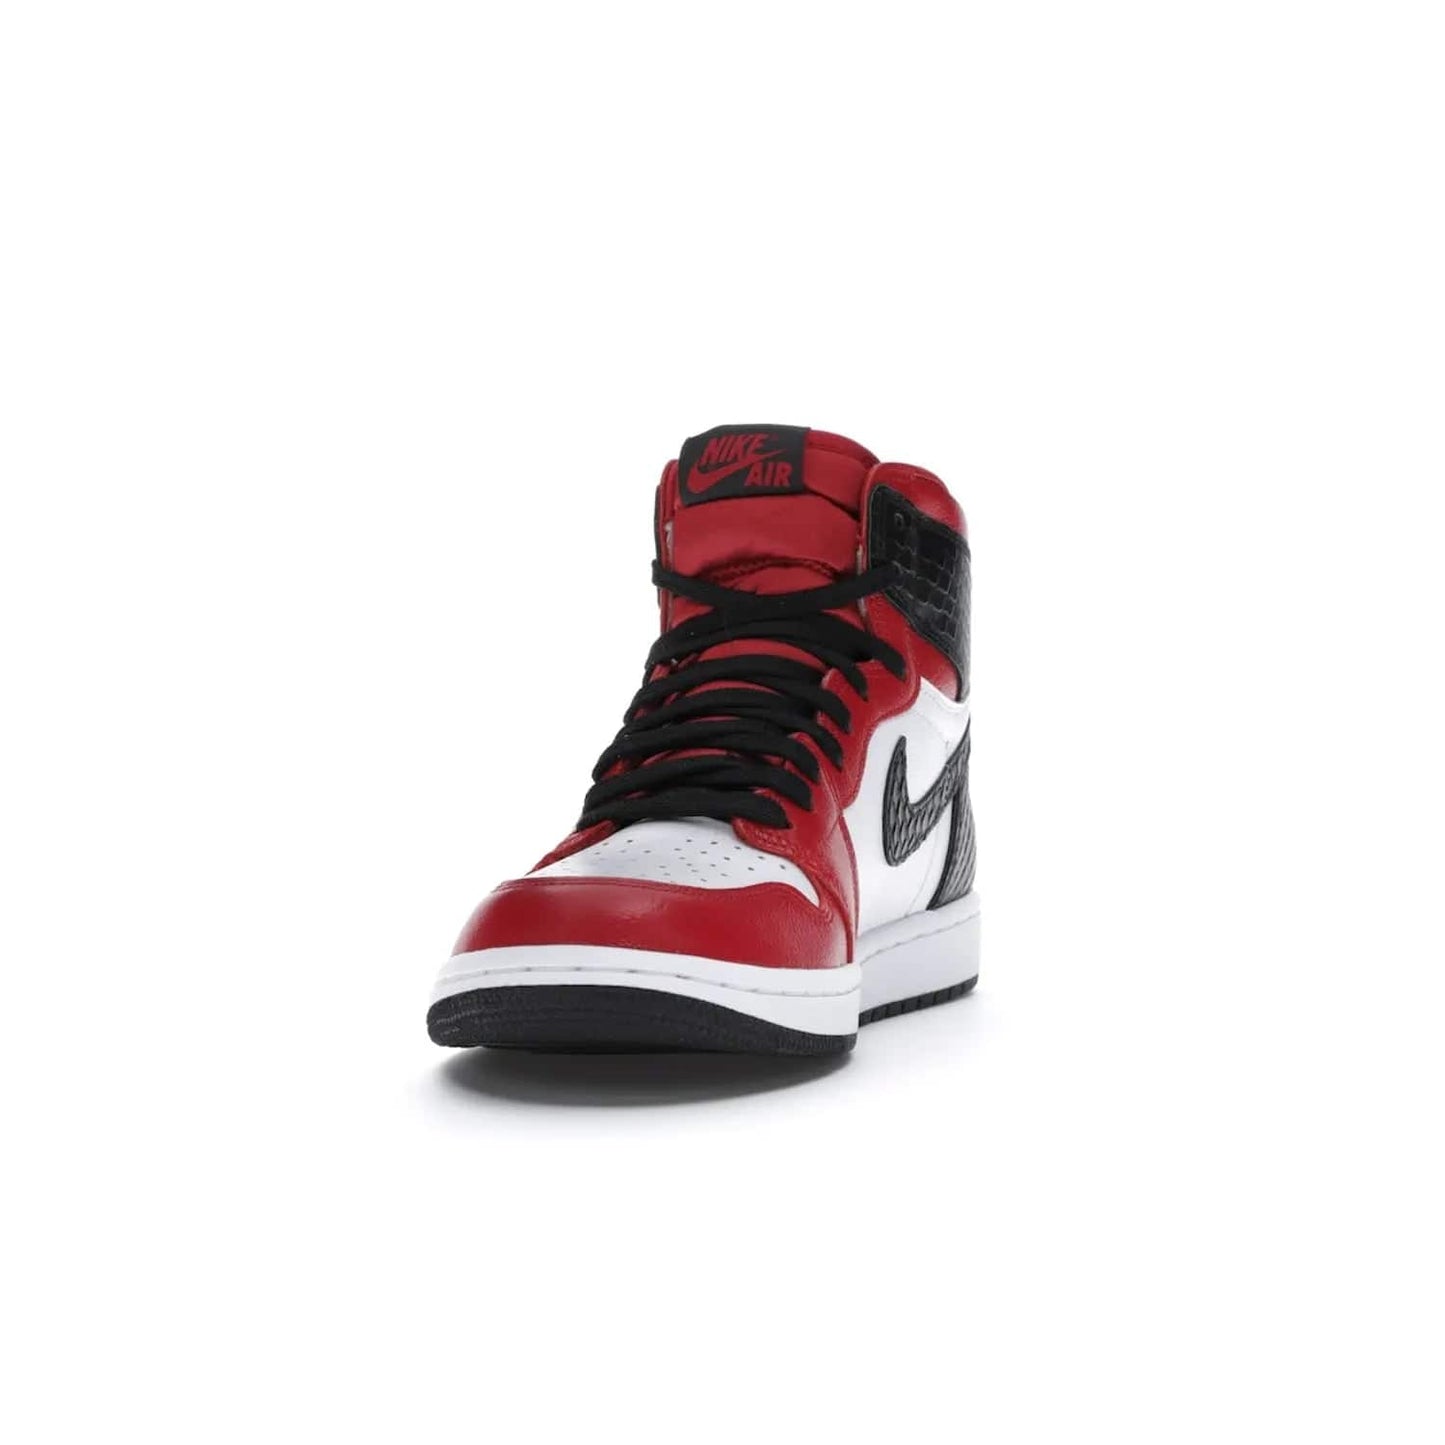 Jordan 1 Retro High Satin Snake Chicago (Women's) - Image 12 - Only at www.BallersClubKickz.com - Upscale Jordan 1 Retro High Satin Snake Chicago (Women's). Crafted from red and white leather with faux snakeskin details and red satin. Jordan Wings graphic on the ankle, white midsole, and striking red outsole. August 2020 release. Iconic shoes must-have for sneaker collectors.